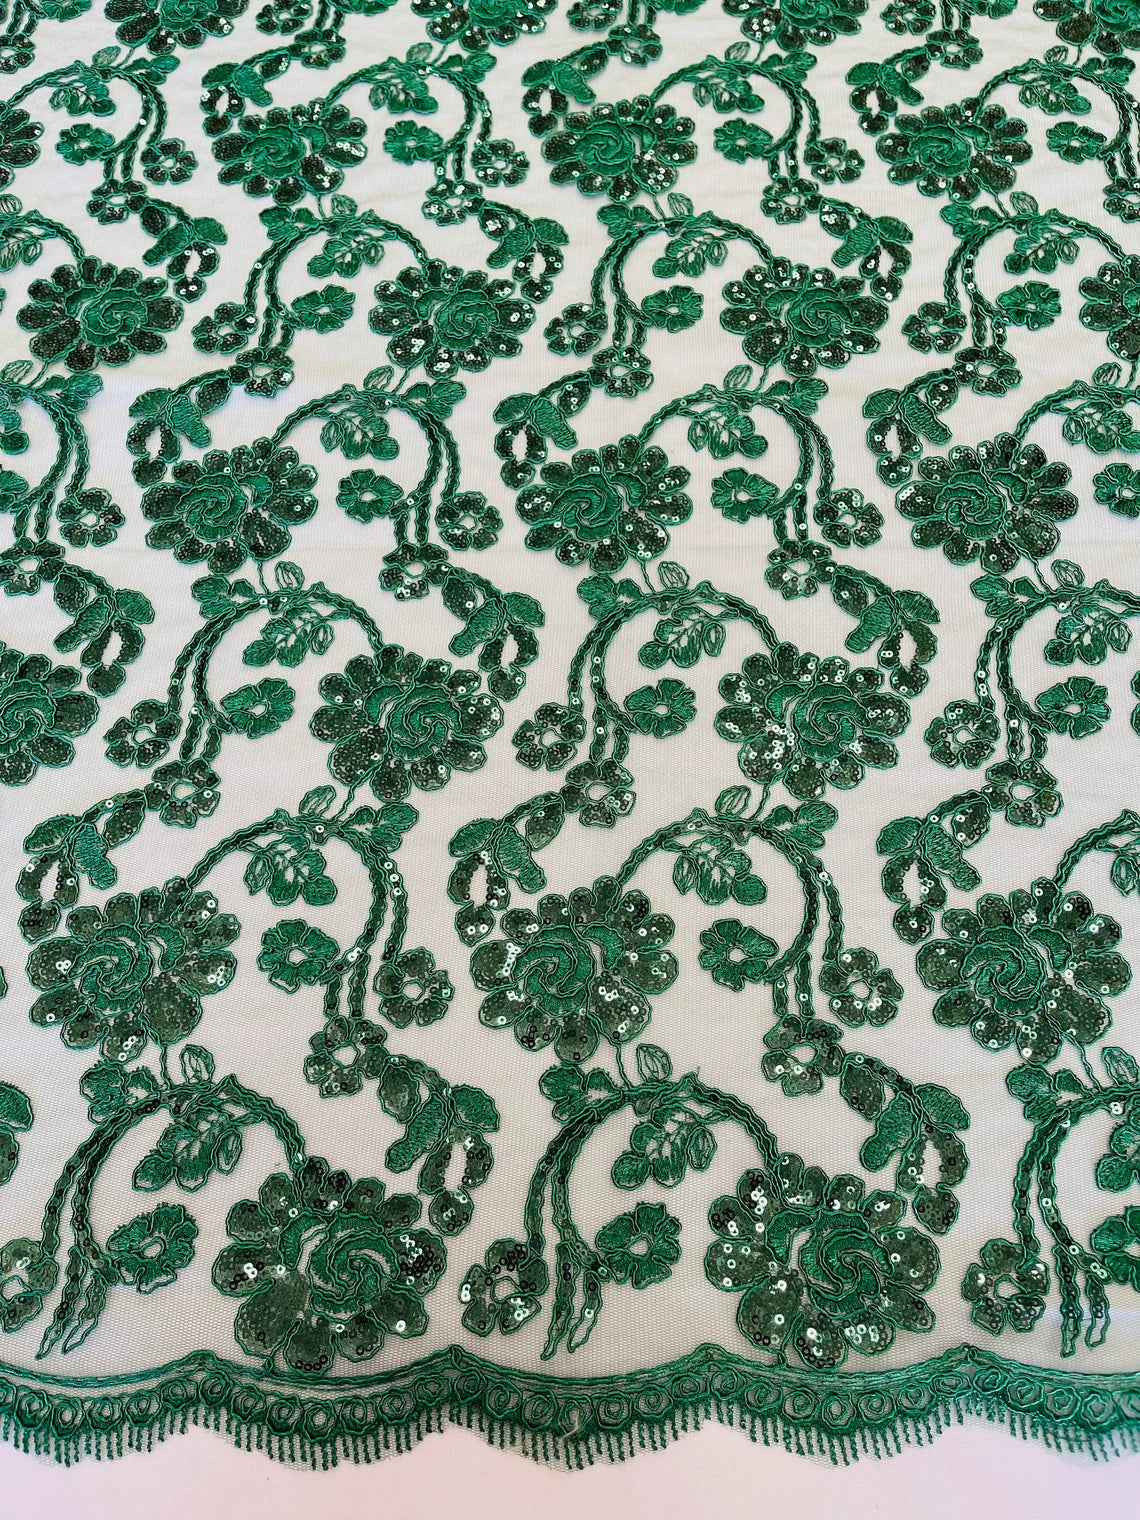 Embroidered Green Lace